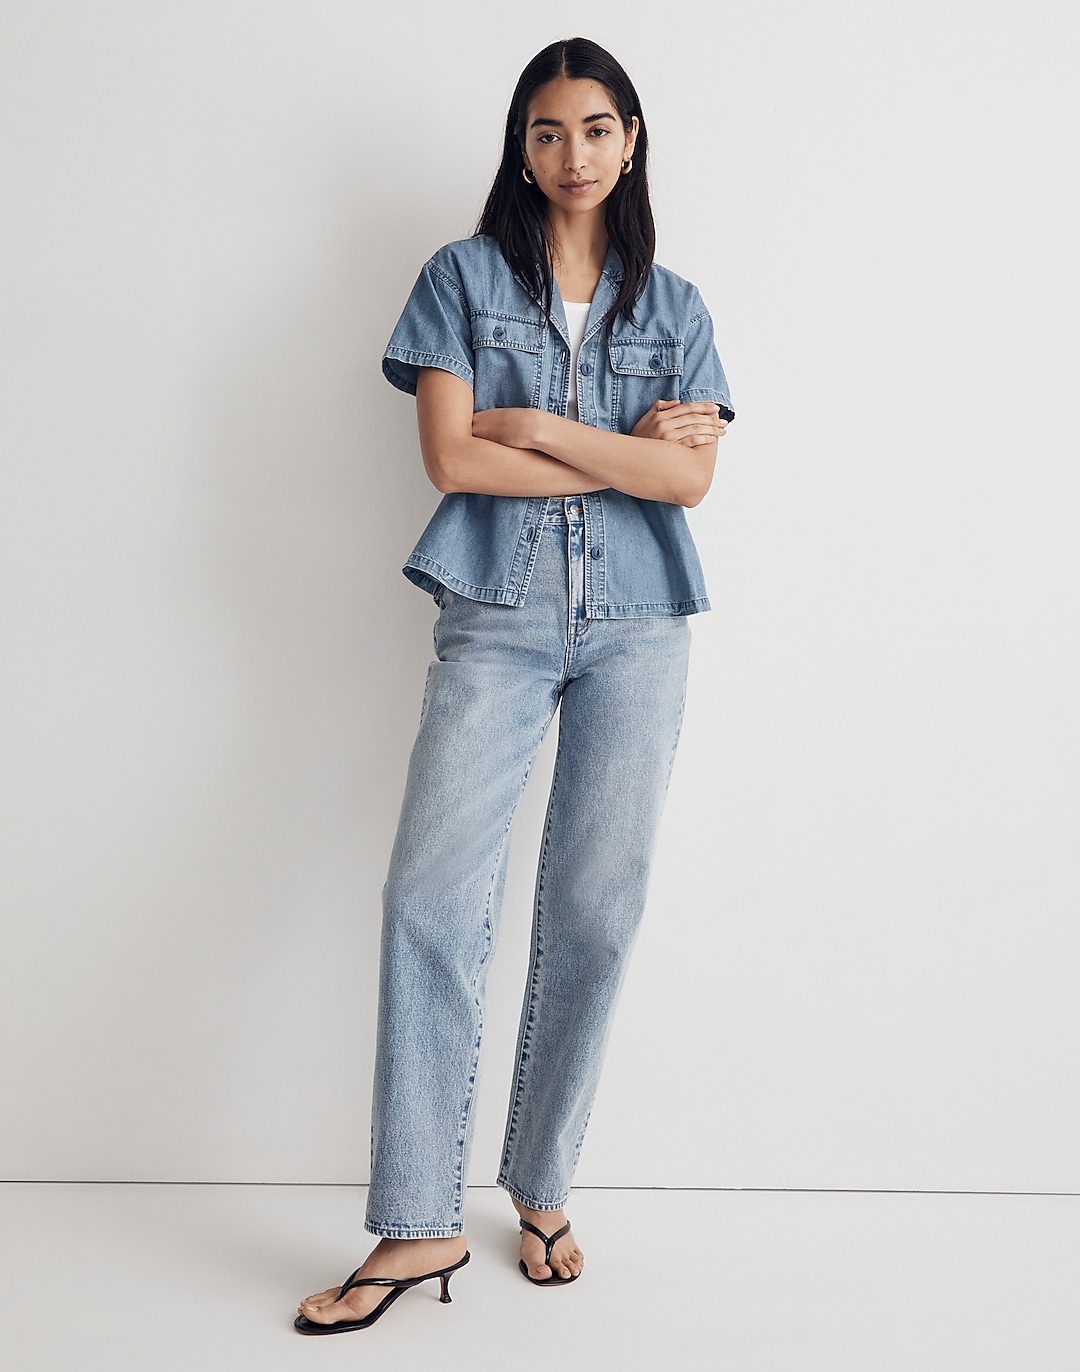 Denim Camp Shirt in Holcrest Wash | Madewell